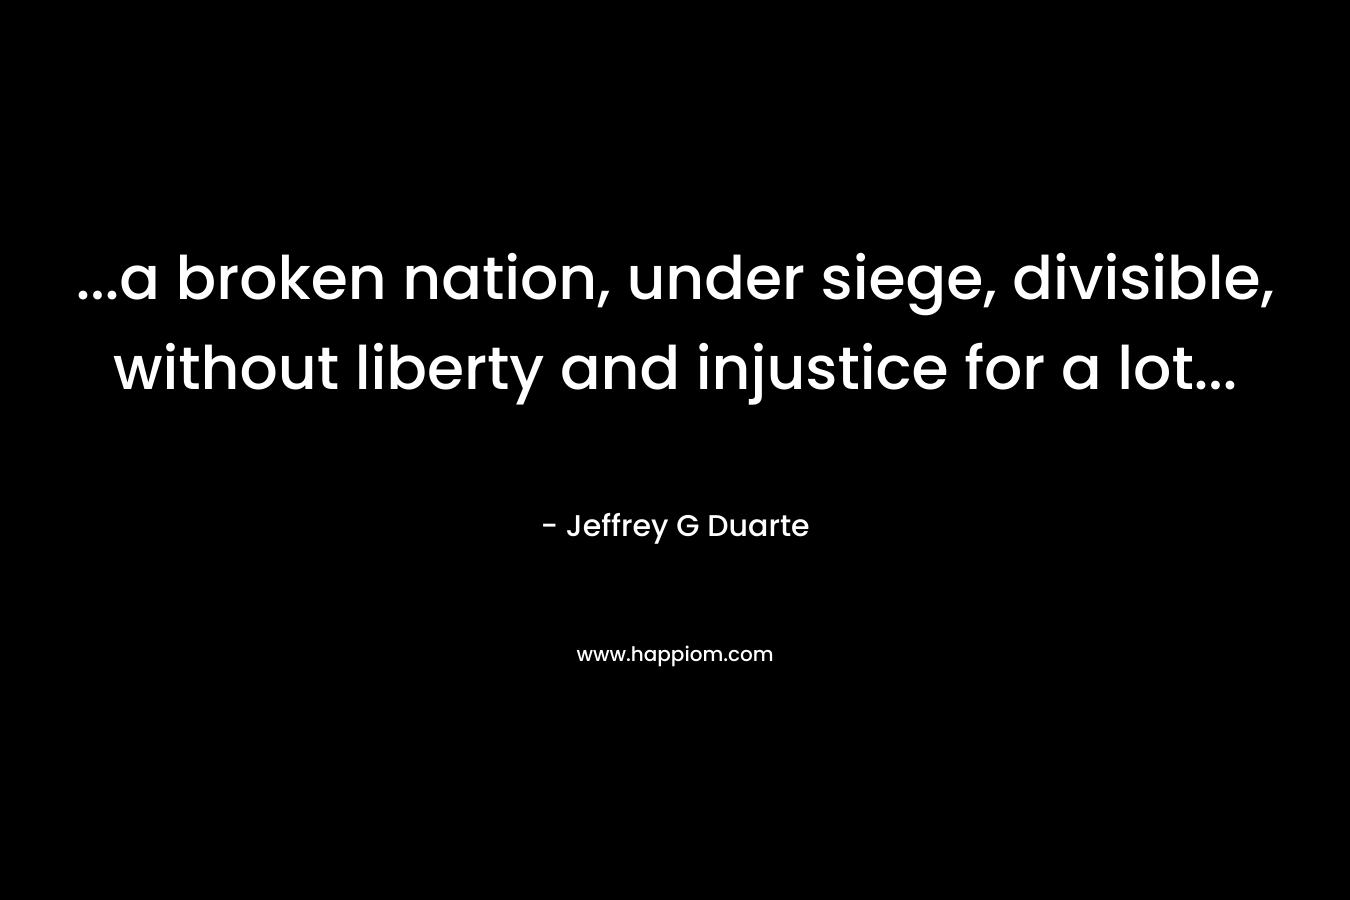 ...a broken nation, under siege, divisible, without liberty and injustice for a lot...